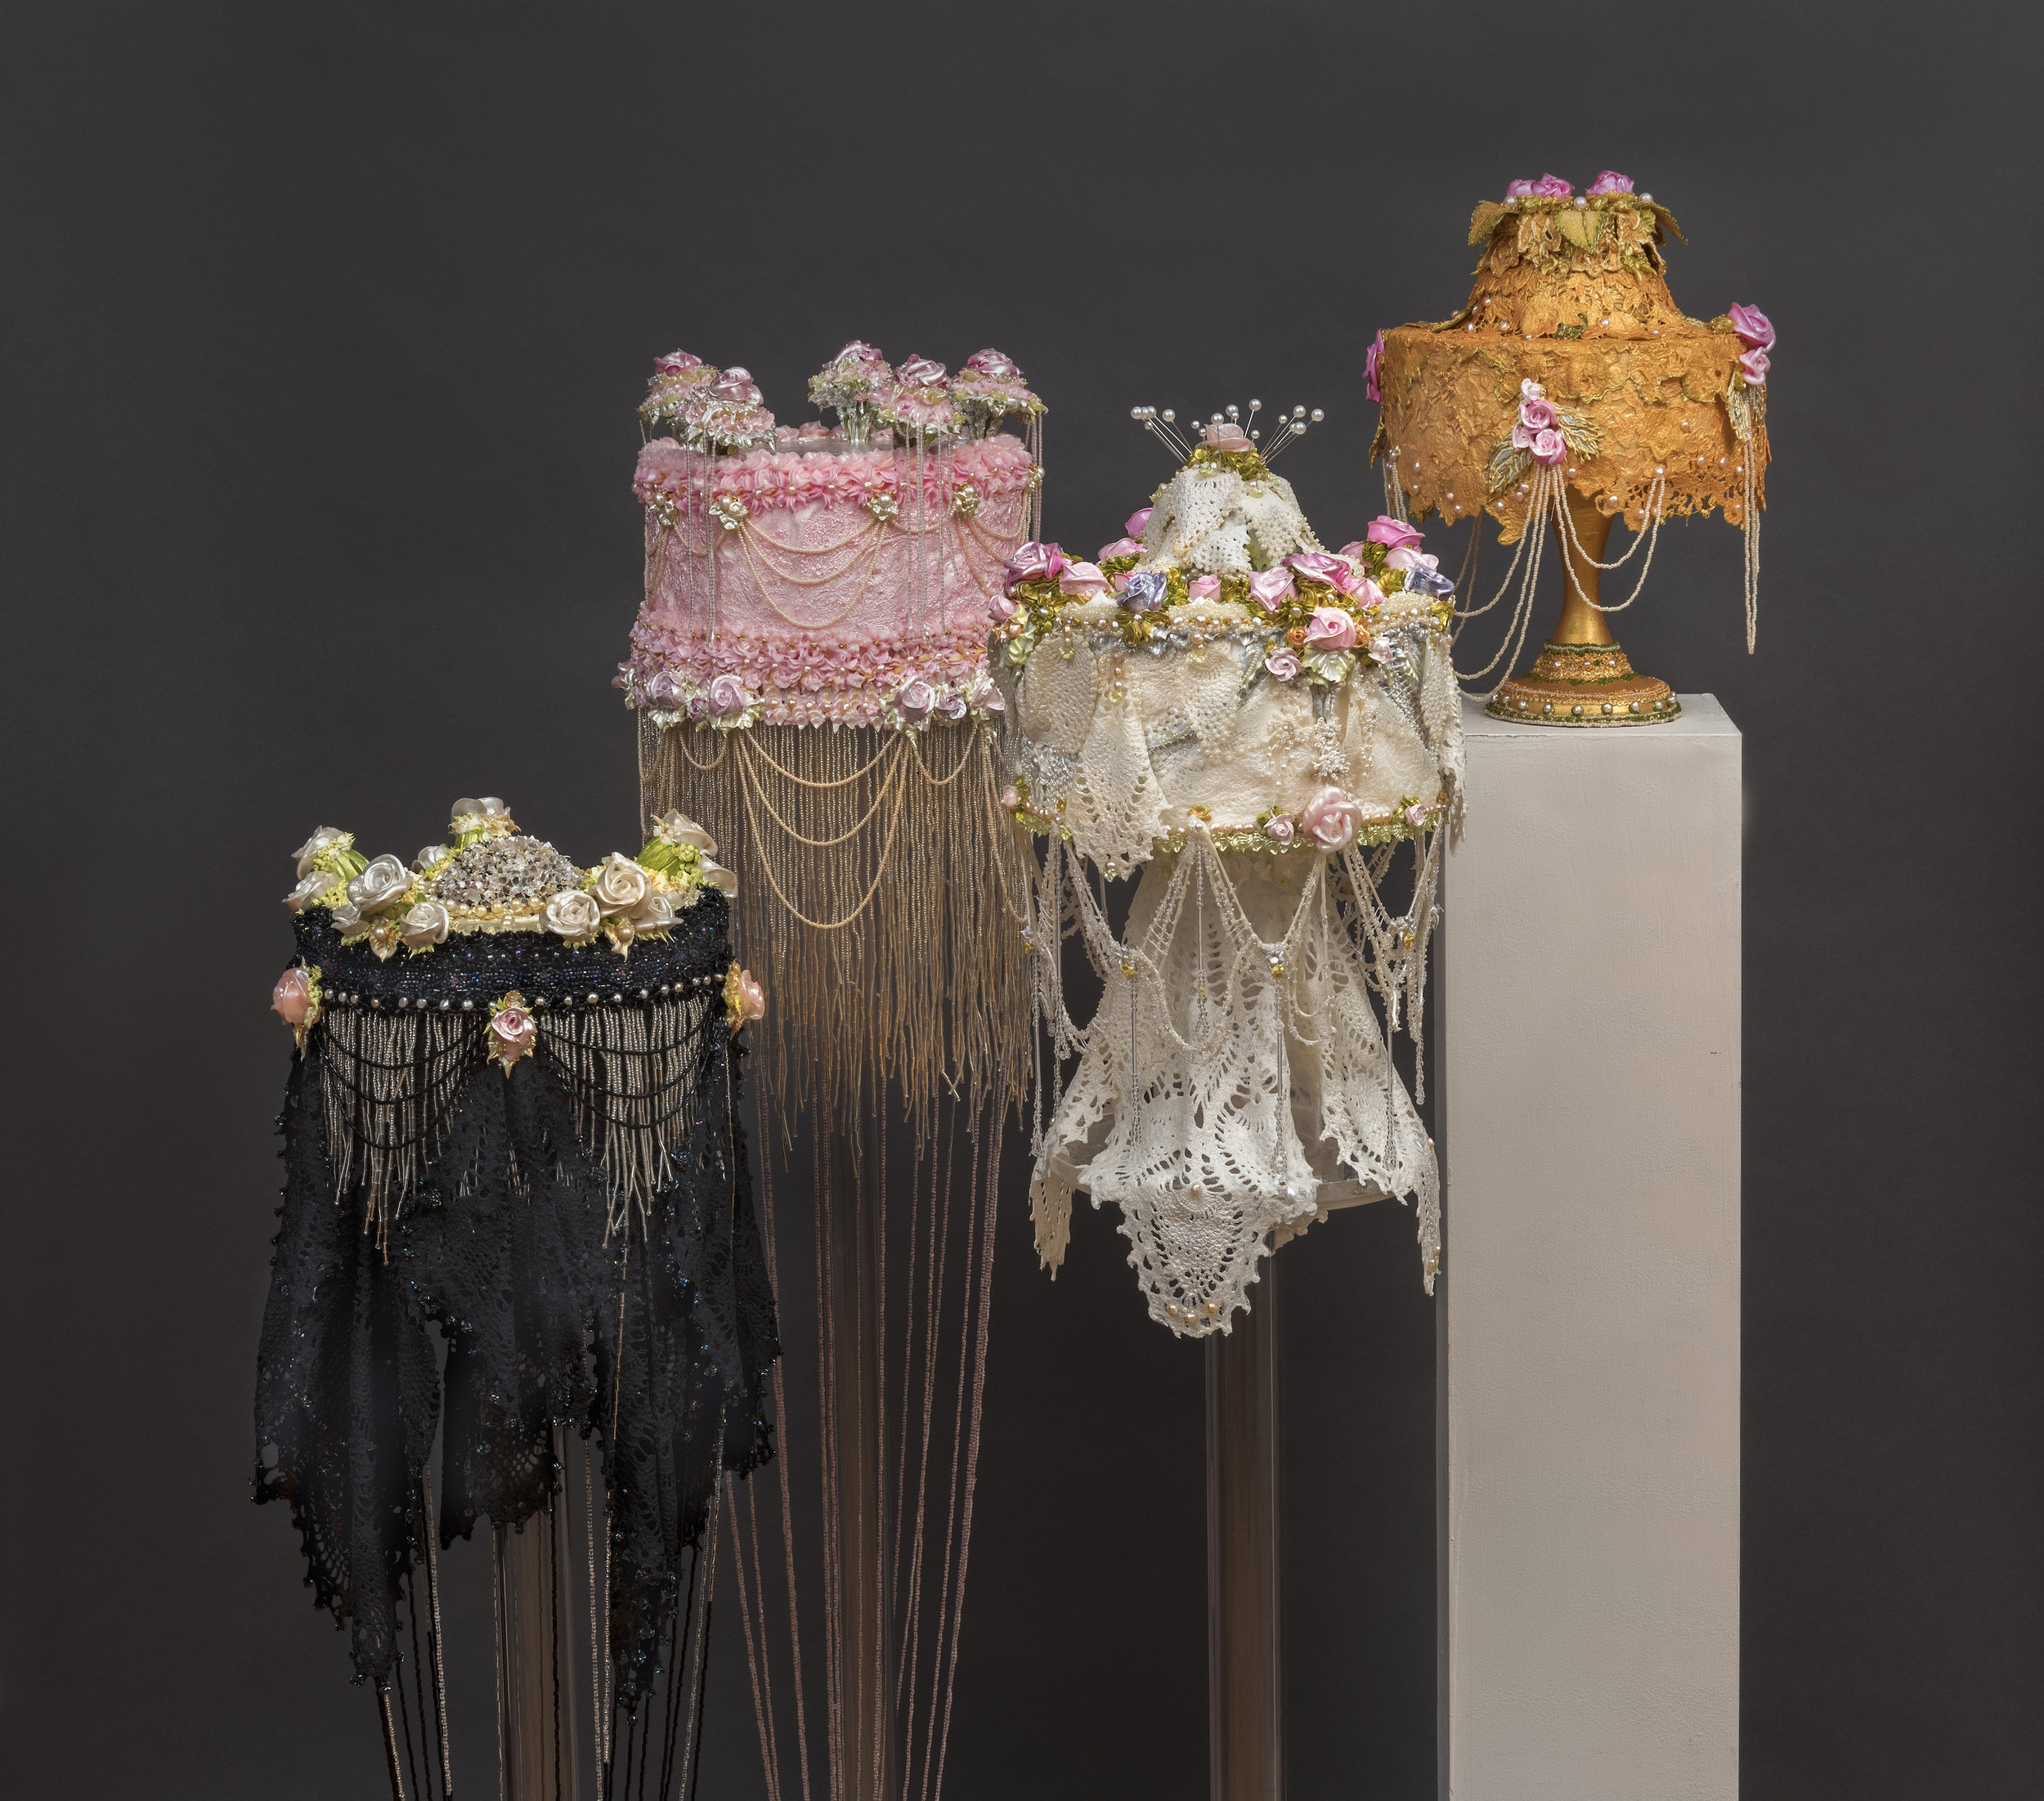 Pat Lasch # Sept 21 - Nov 3, 2018 &lt;alt= "Four acrylic cakes with fabric and pearls hanging (black, pink, white, and orange cakes)"&gt;